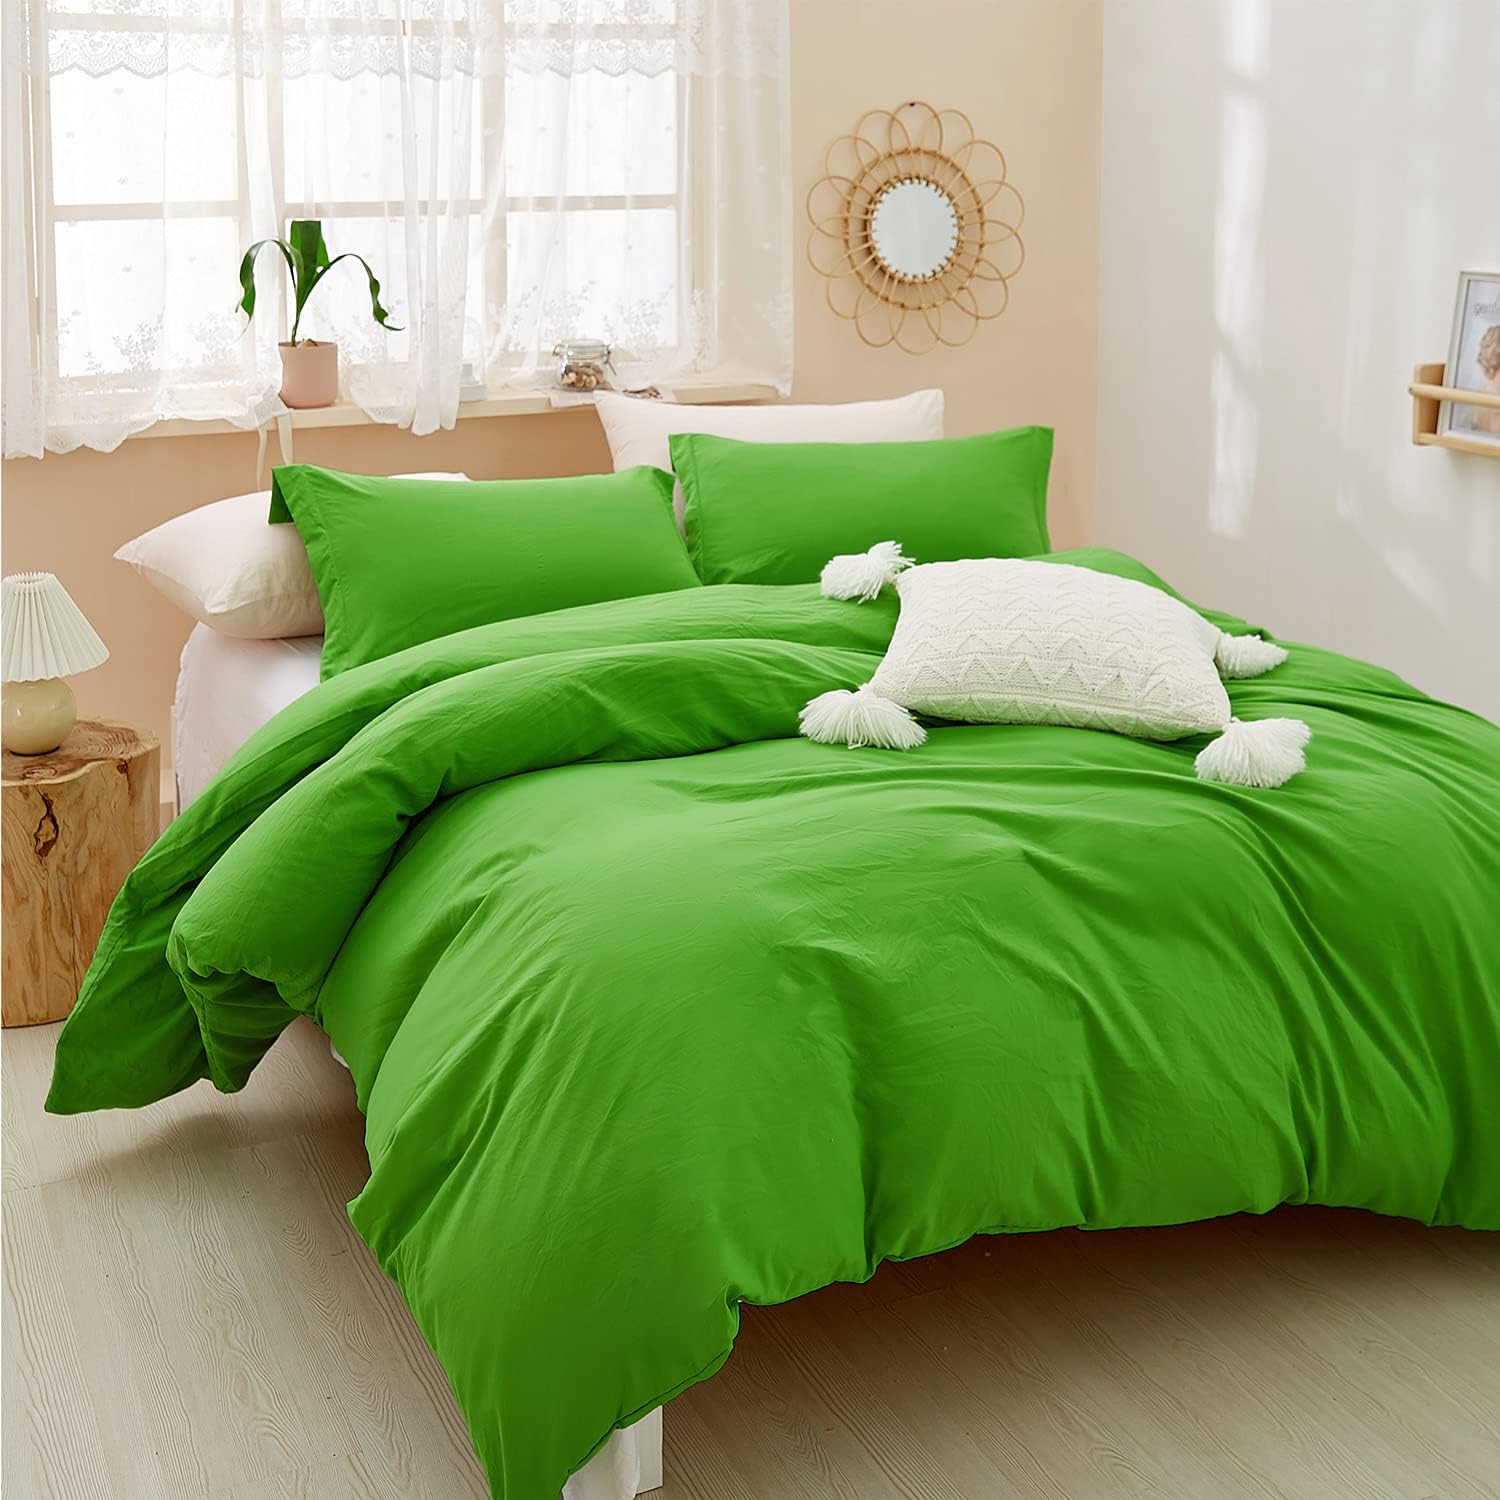 Green Duvet Cover Set Queen Size, Ultra Soft Washed Microfiber Bedding Comforter Cover Set, 3 Pieces Comfortable and Easy Care for a Better Sleep with Hidden Zipper Closure, Corner Ties